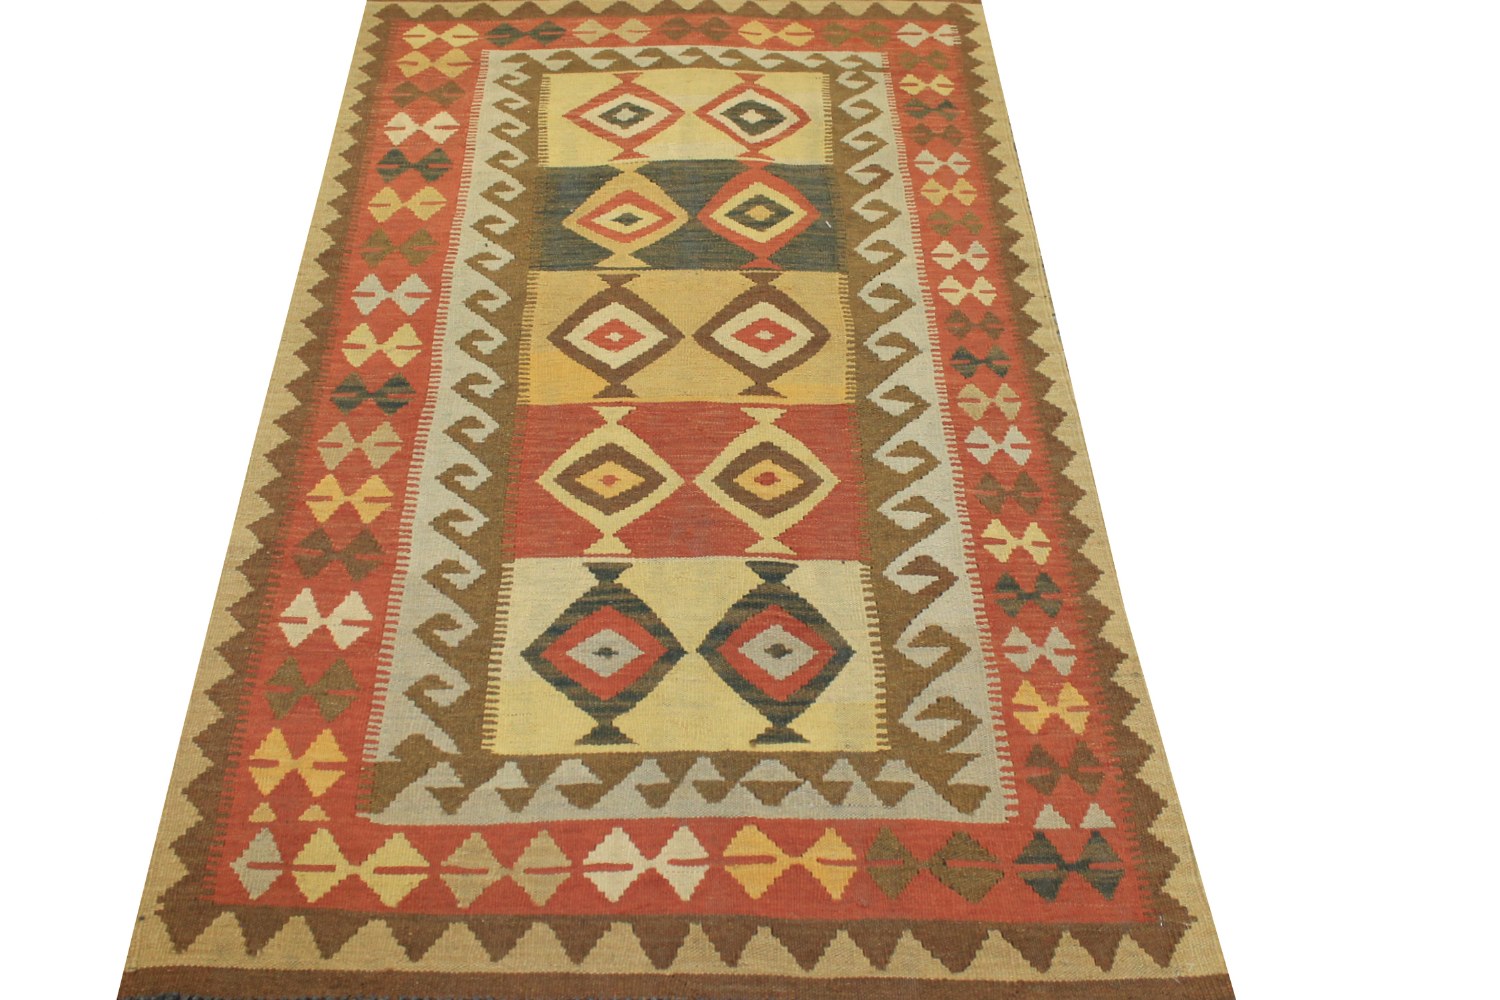 4x6 Flat Weave Hand Knotted Wool Area Rug - MR13326